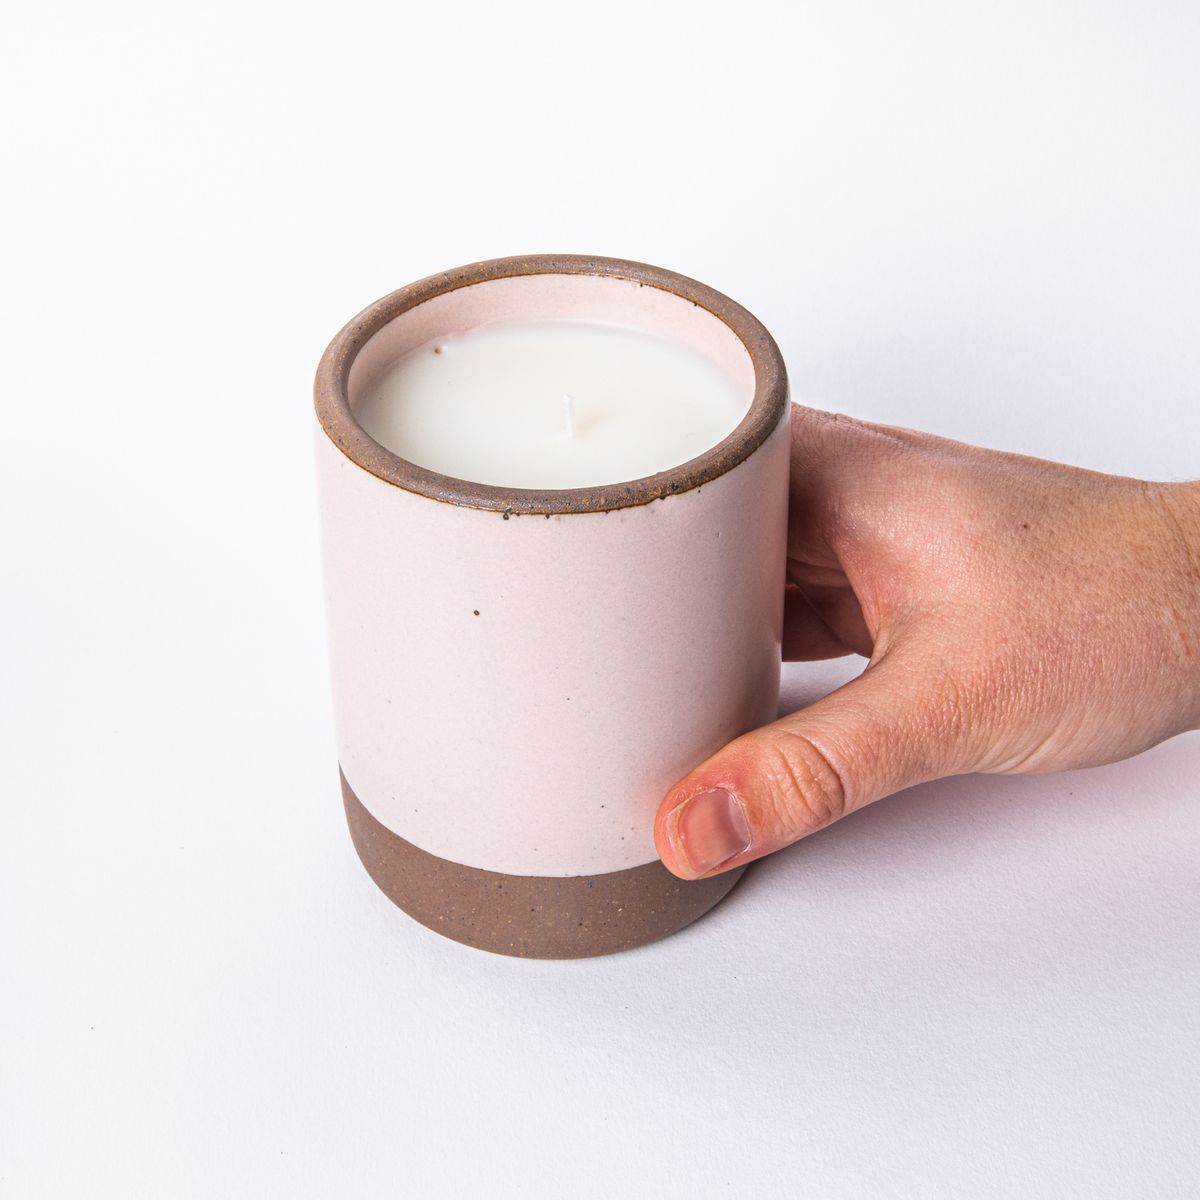 Hand holding a large ceramic vessel in soft light pink color with candle inside